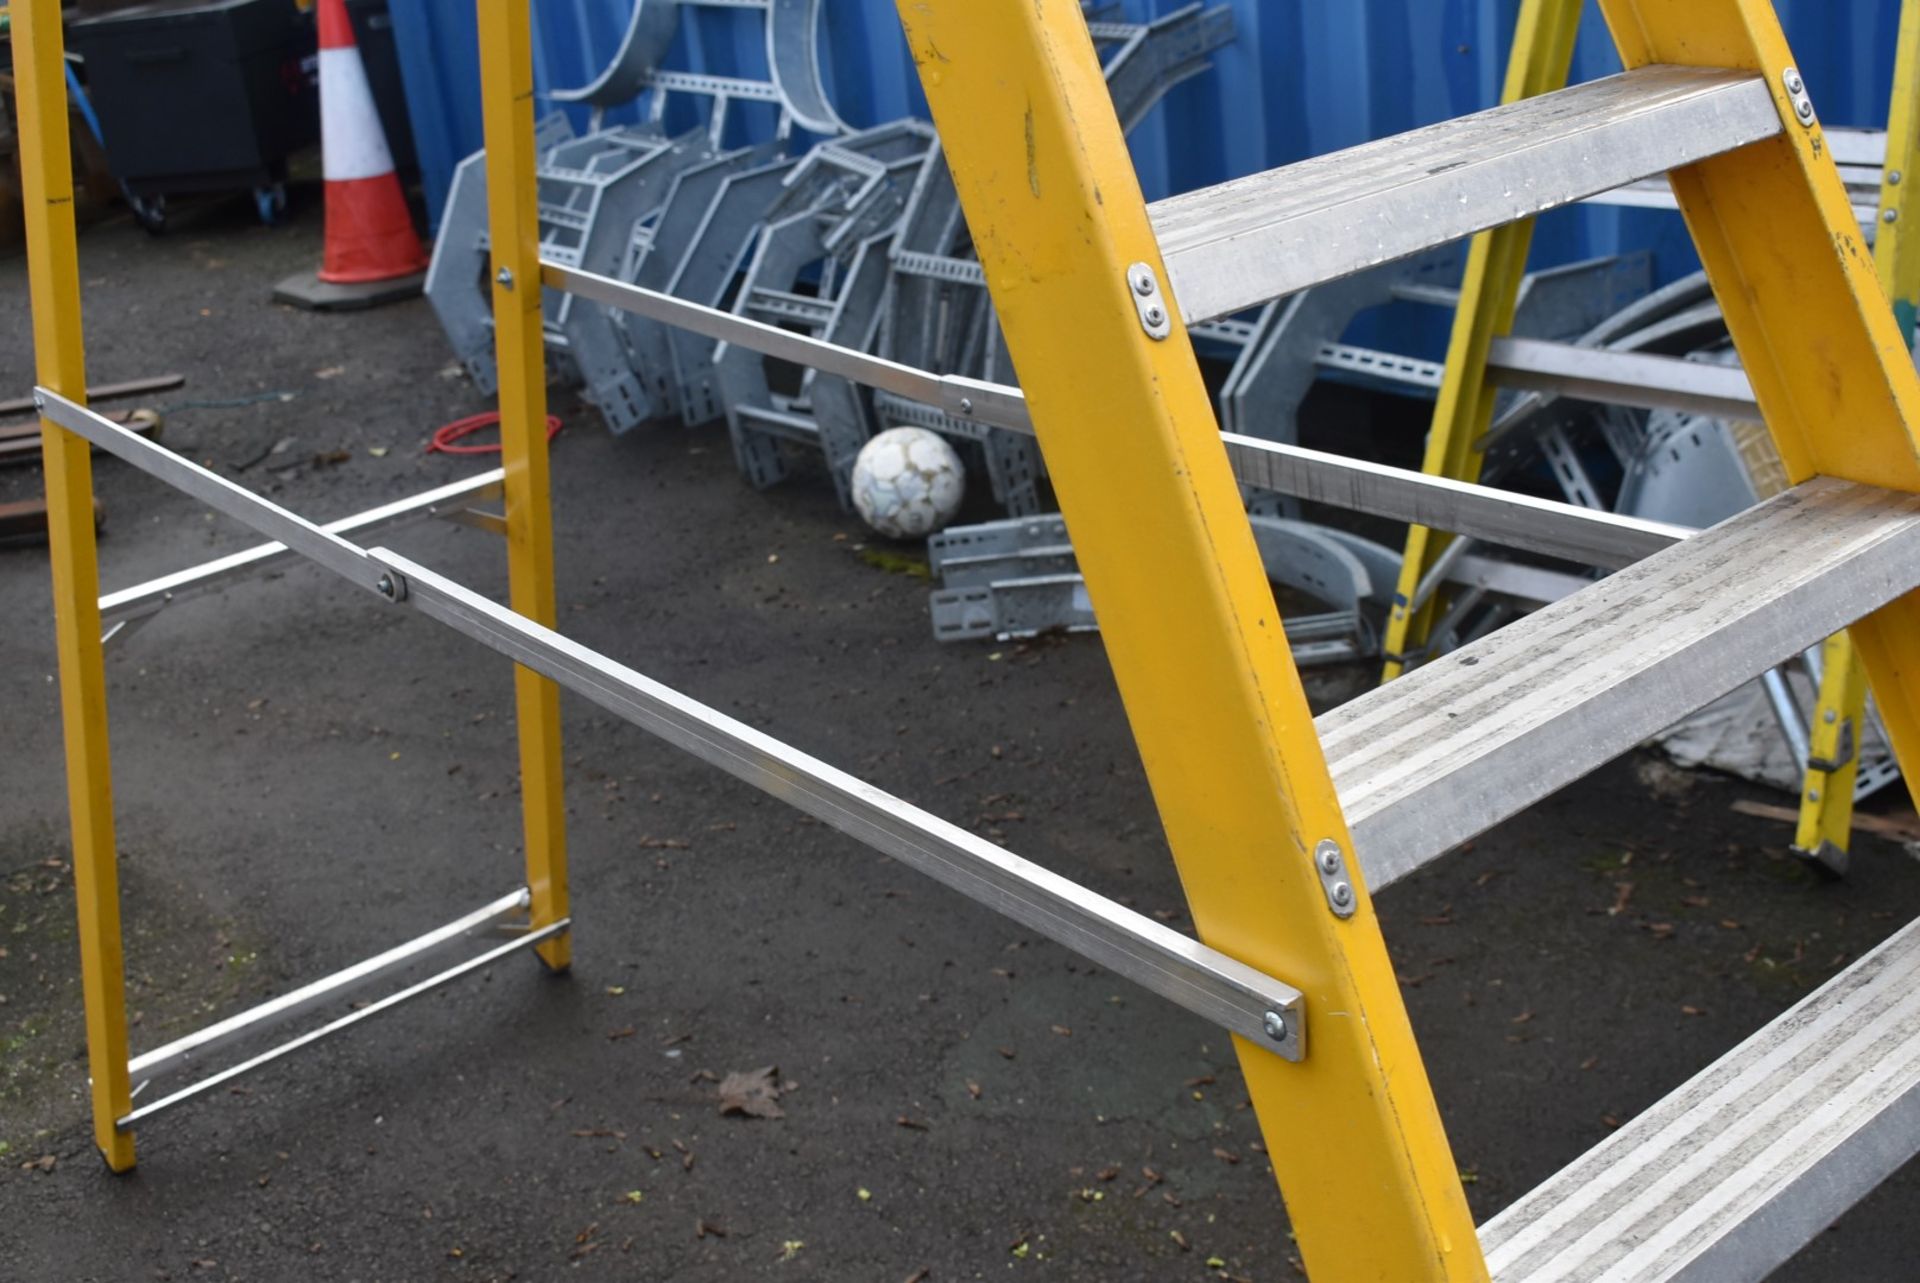 1 x Fibreglass Site Ladder With 12 Treads - Suitable For Working Around Thermal or Electrical Danger - Image 8 of 9